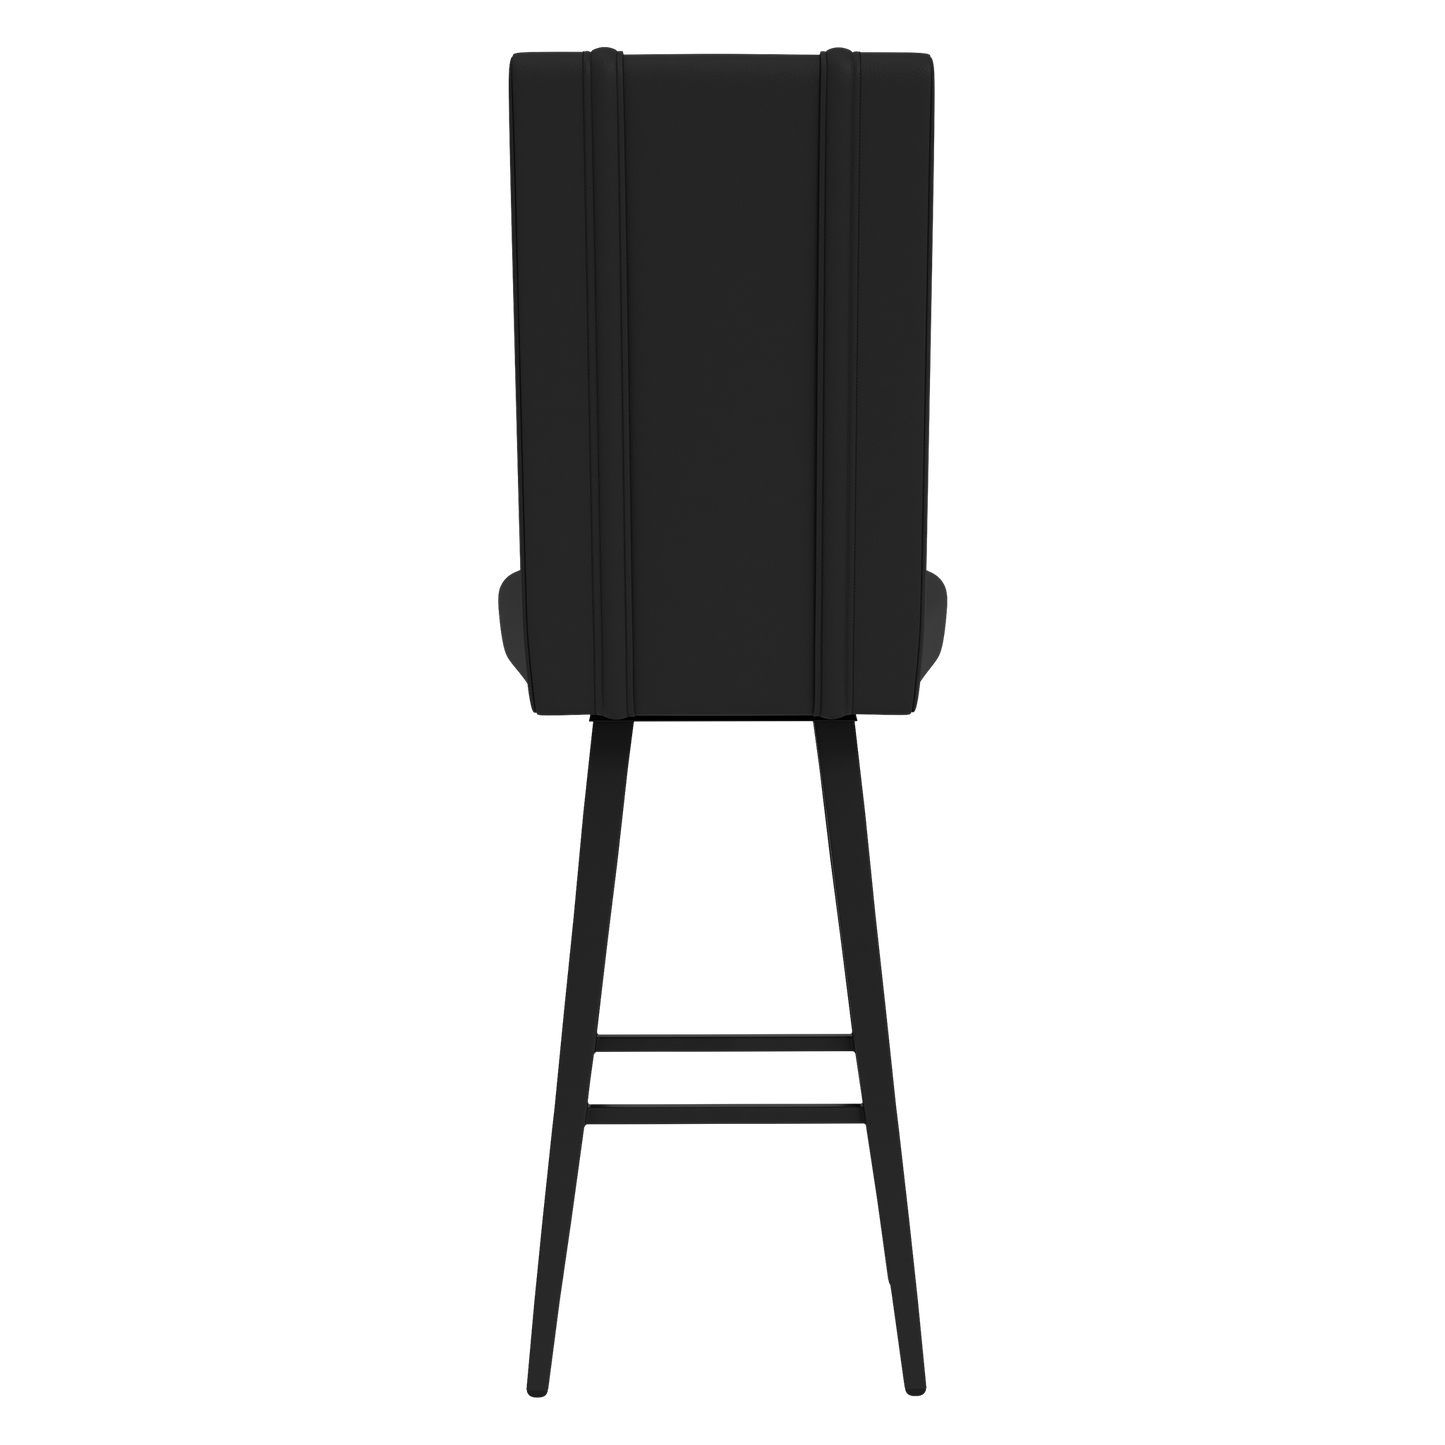 Swivel Bar Stool 2000 with Cleveland Cavaliers Secondary Logo